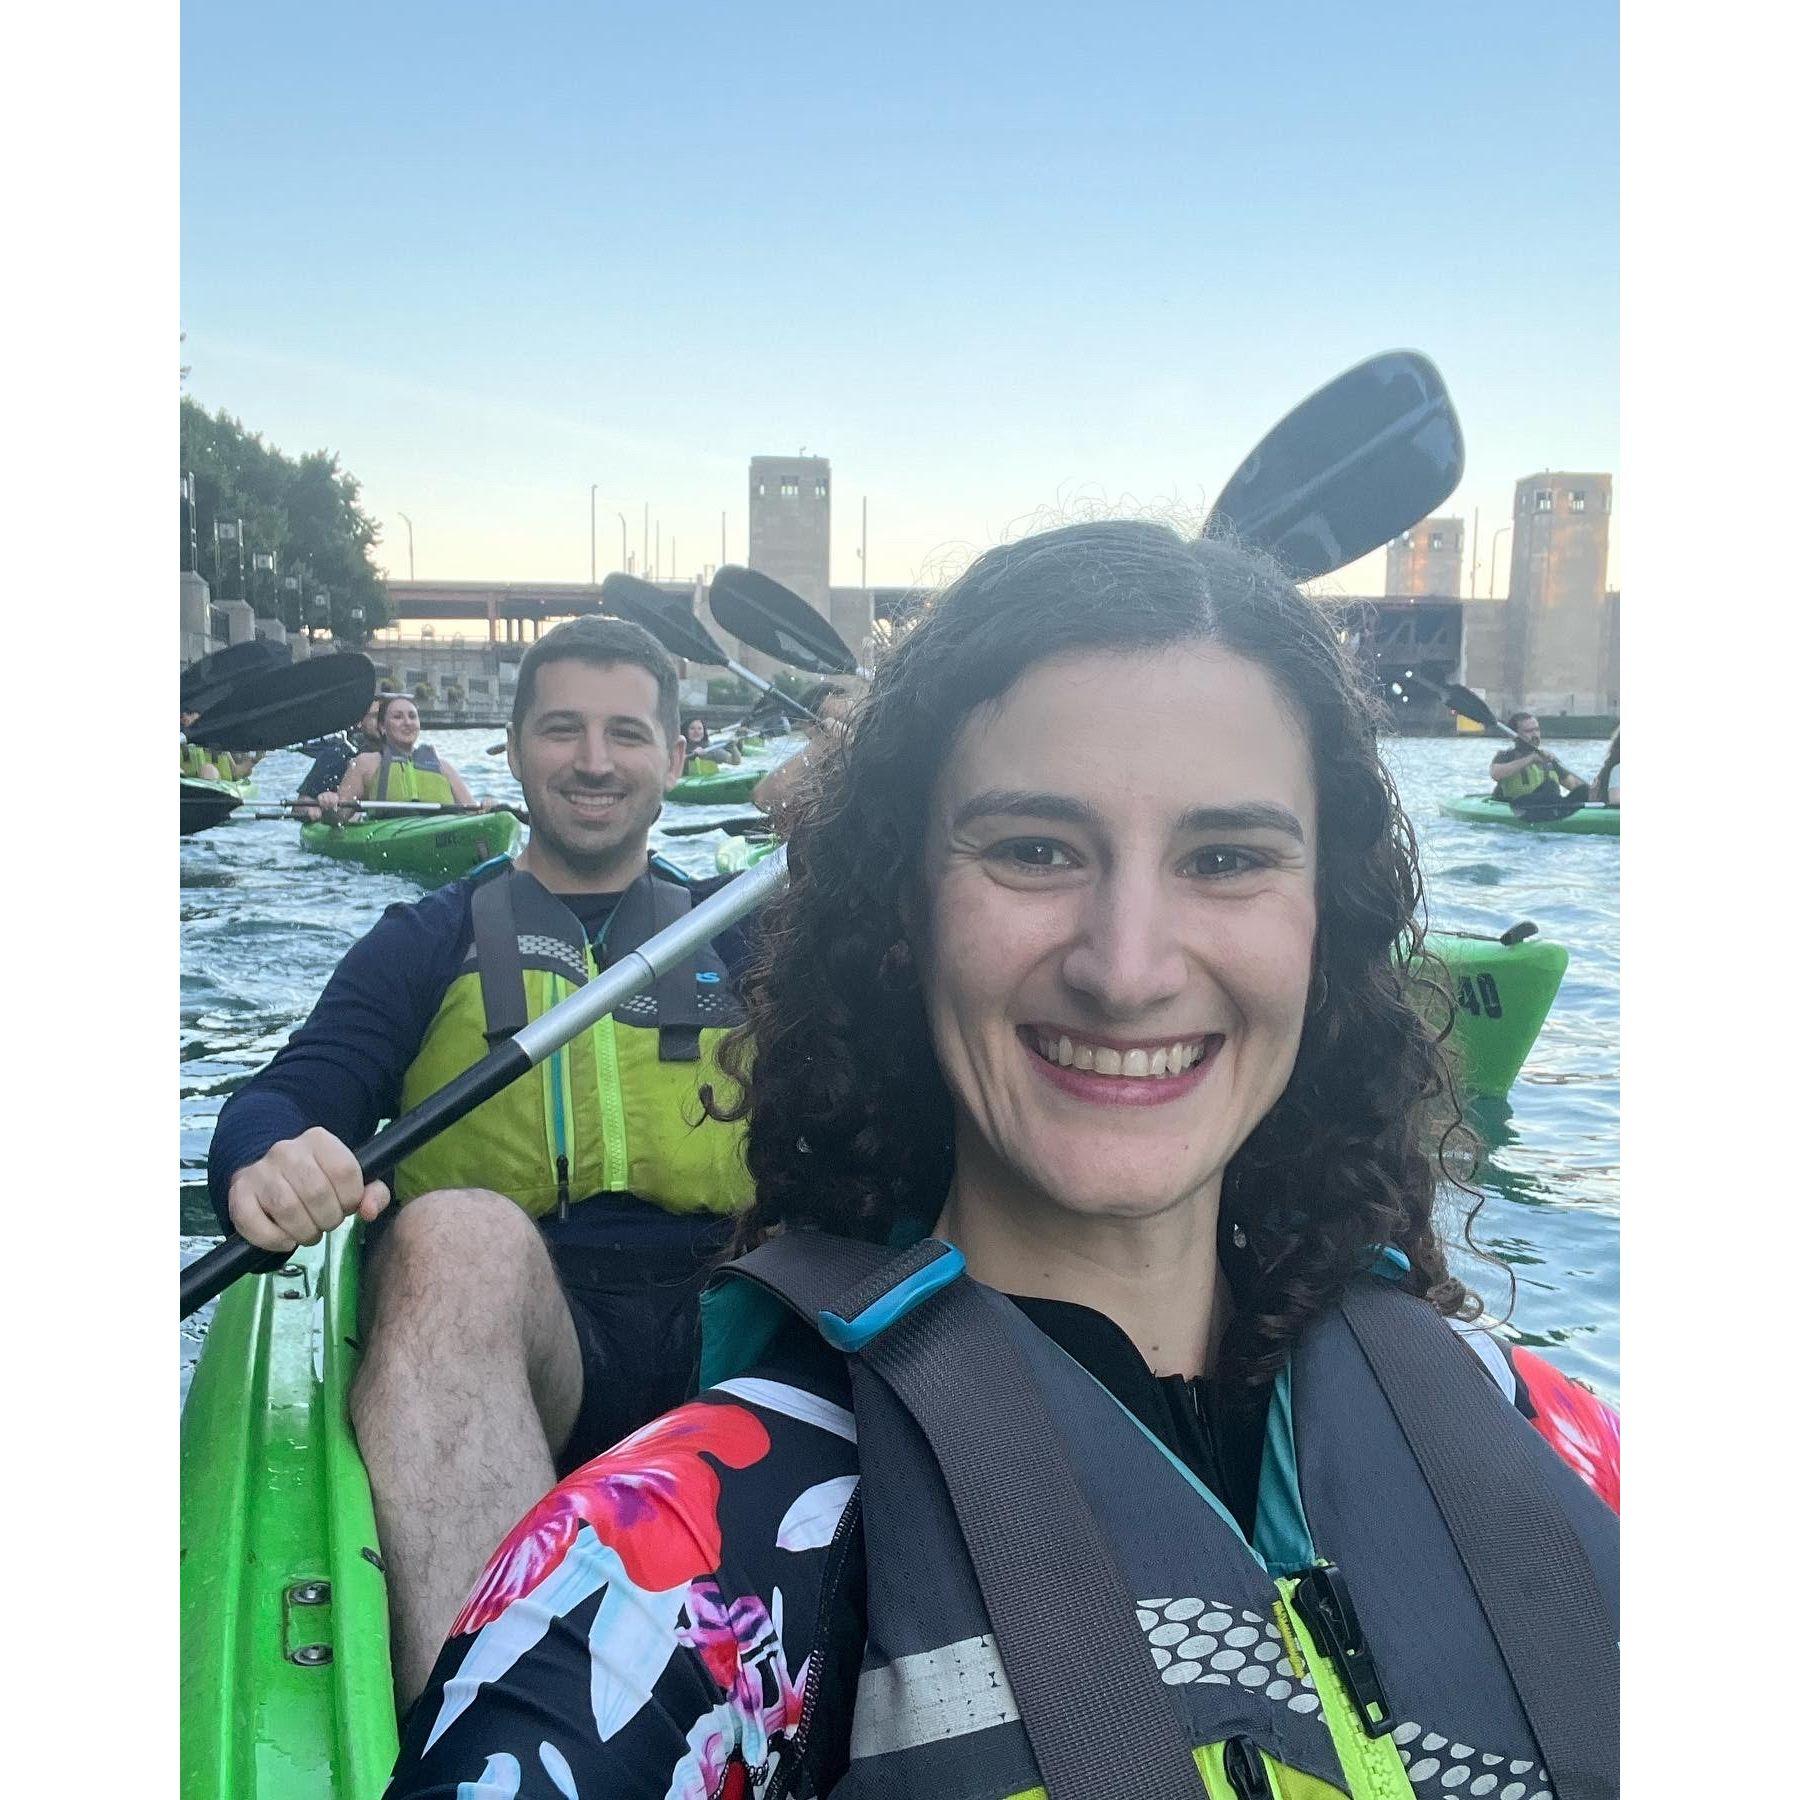 Kayak tour in the Chicago river